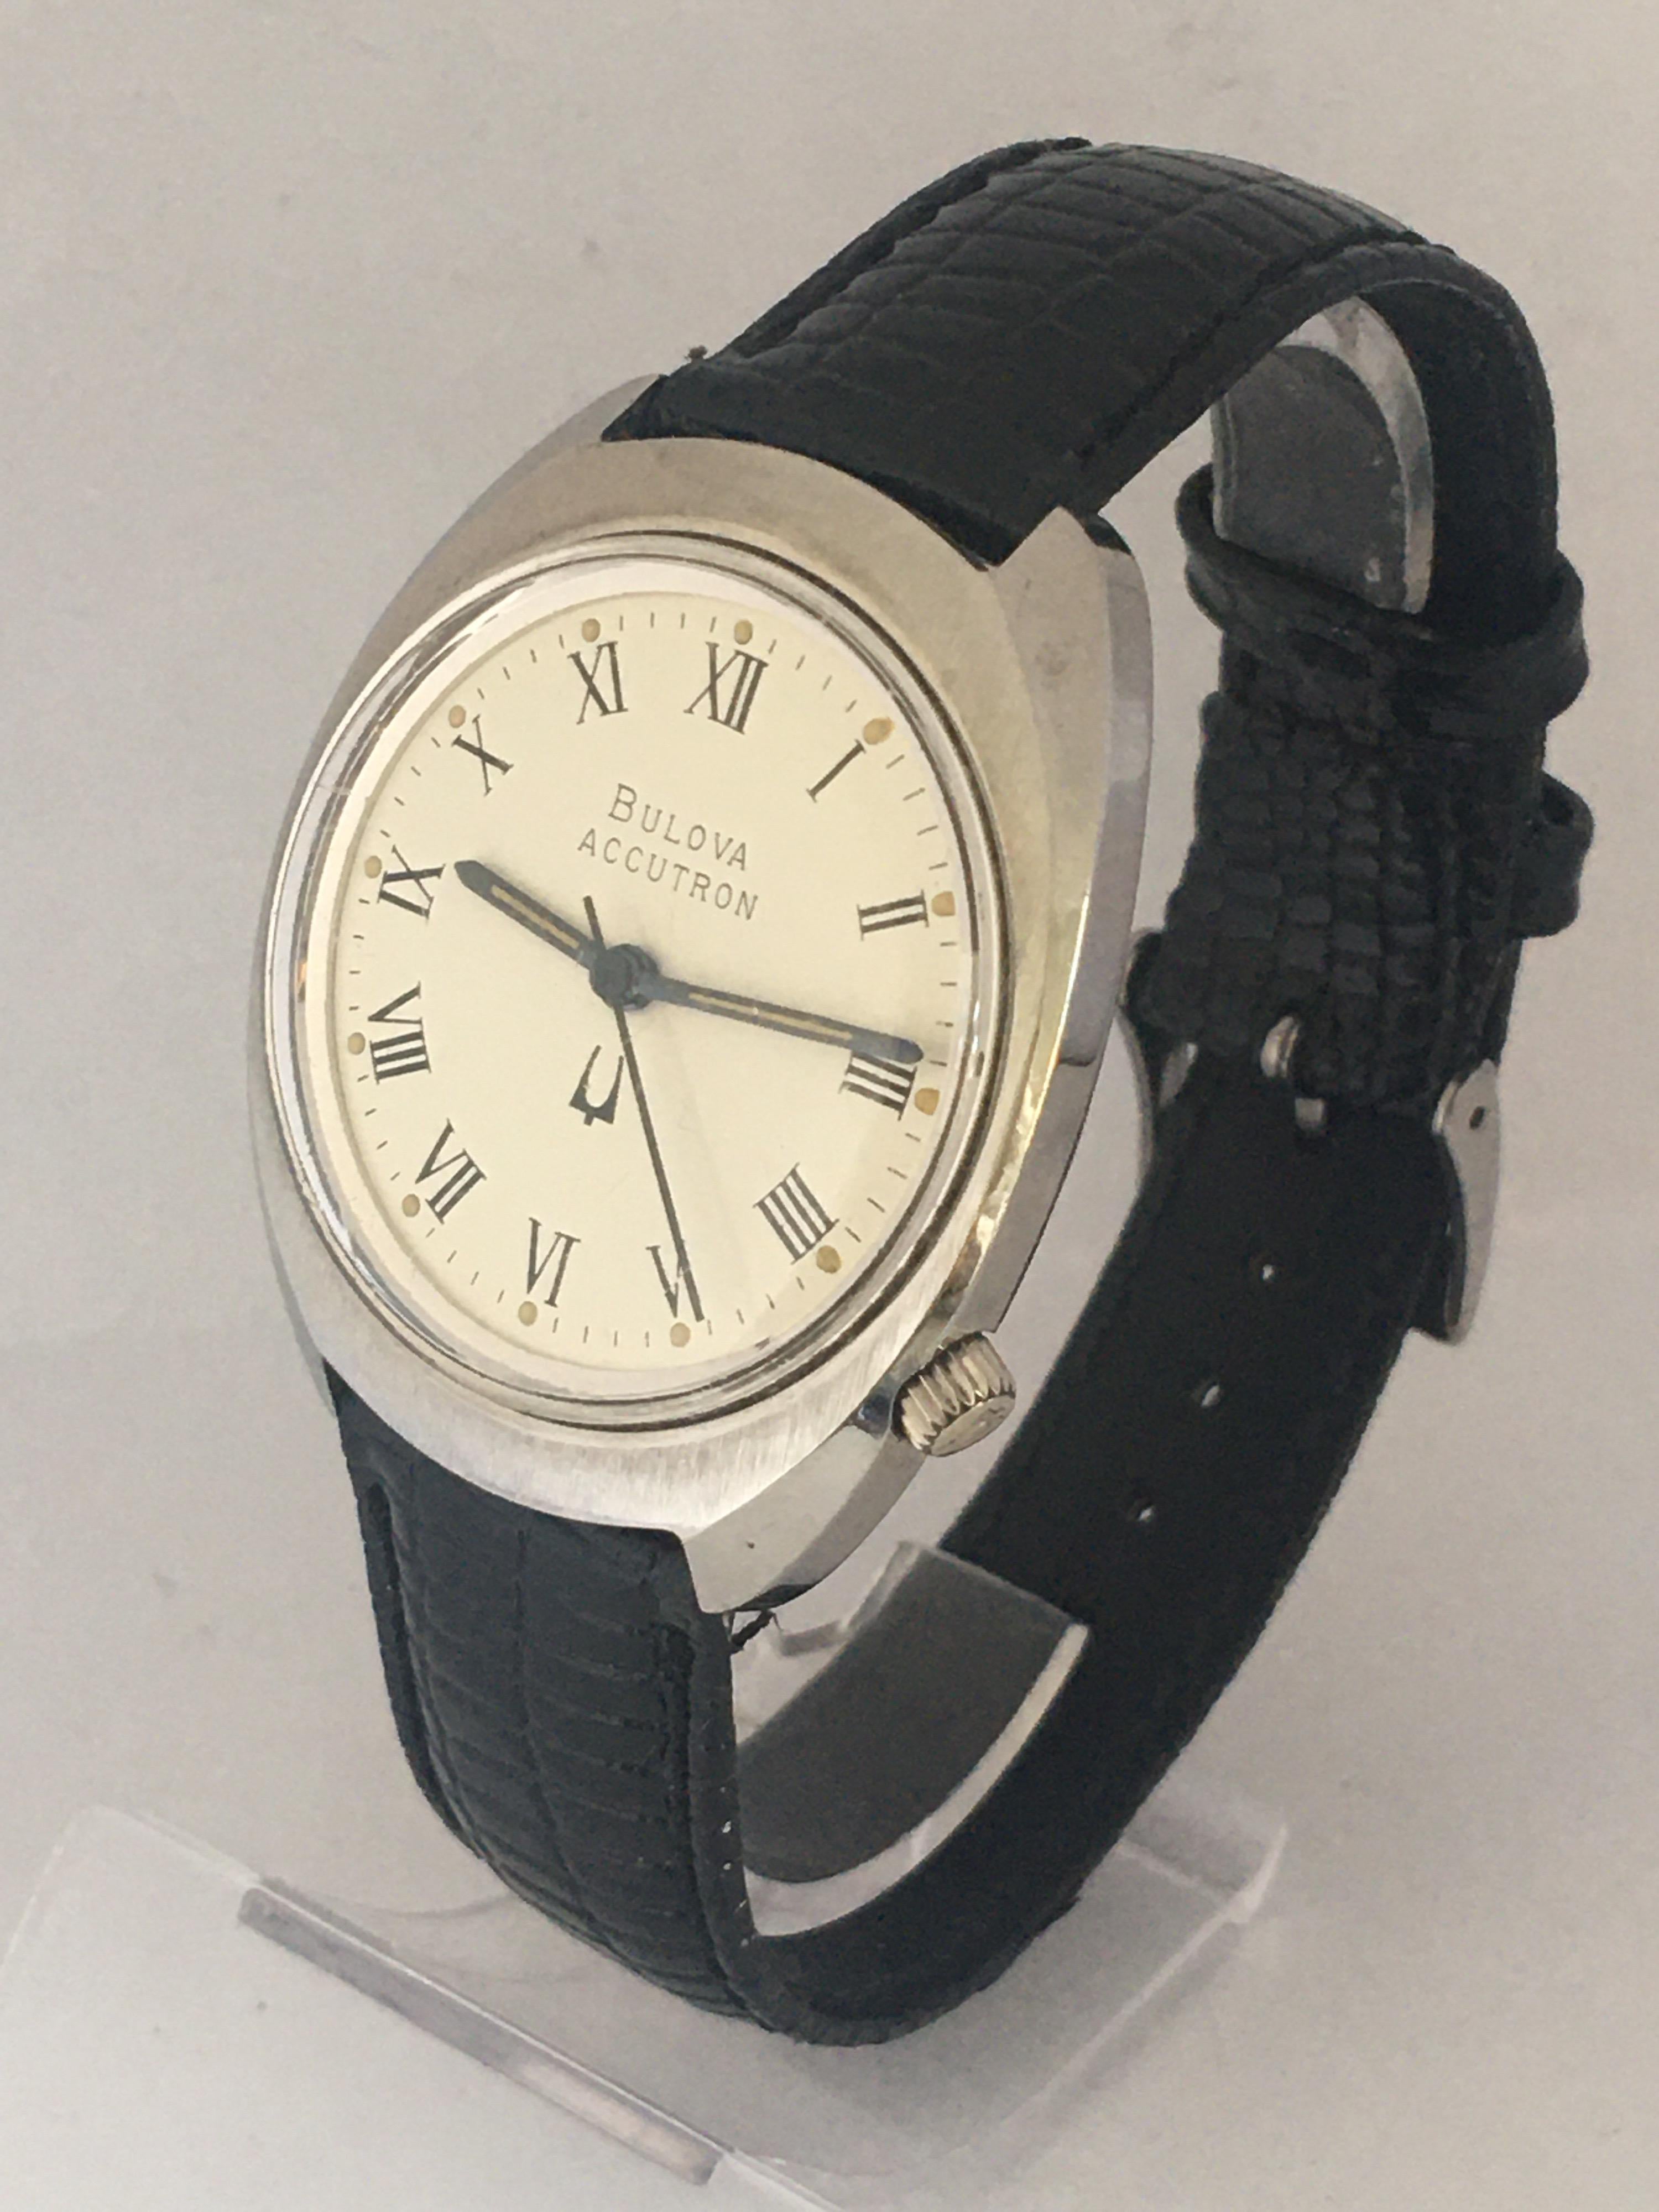 This beautiful pre-owned battery operated vintage watch is in very good working condition and it runs well.  Please study the images carefully as form part of the description 
